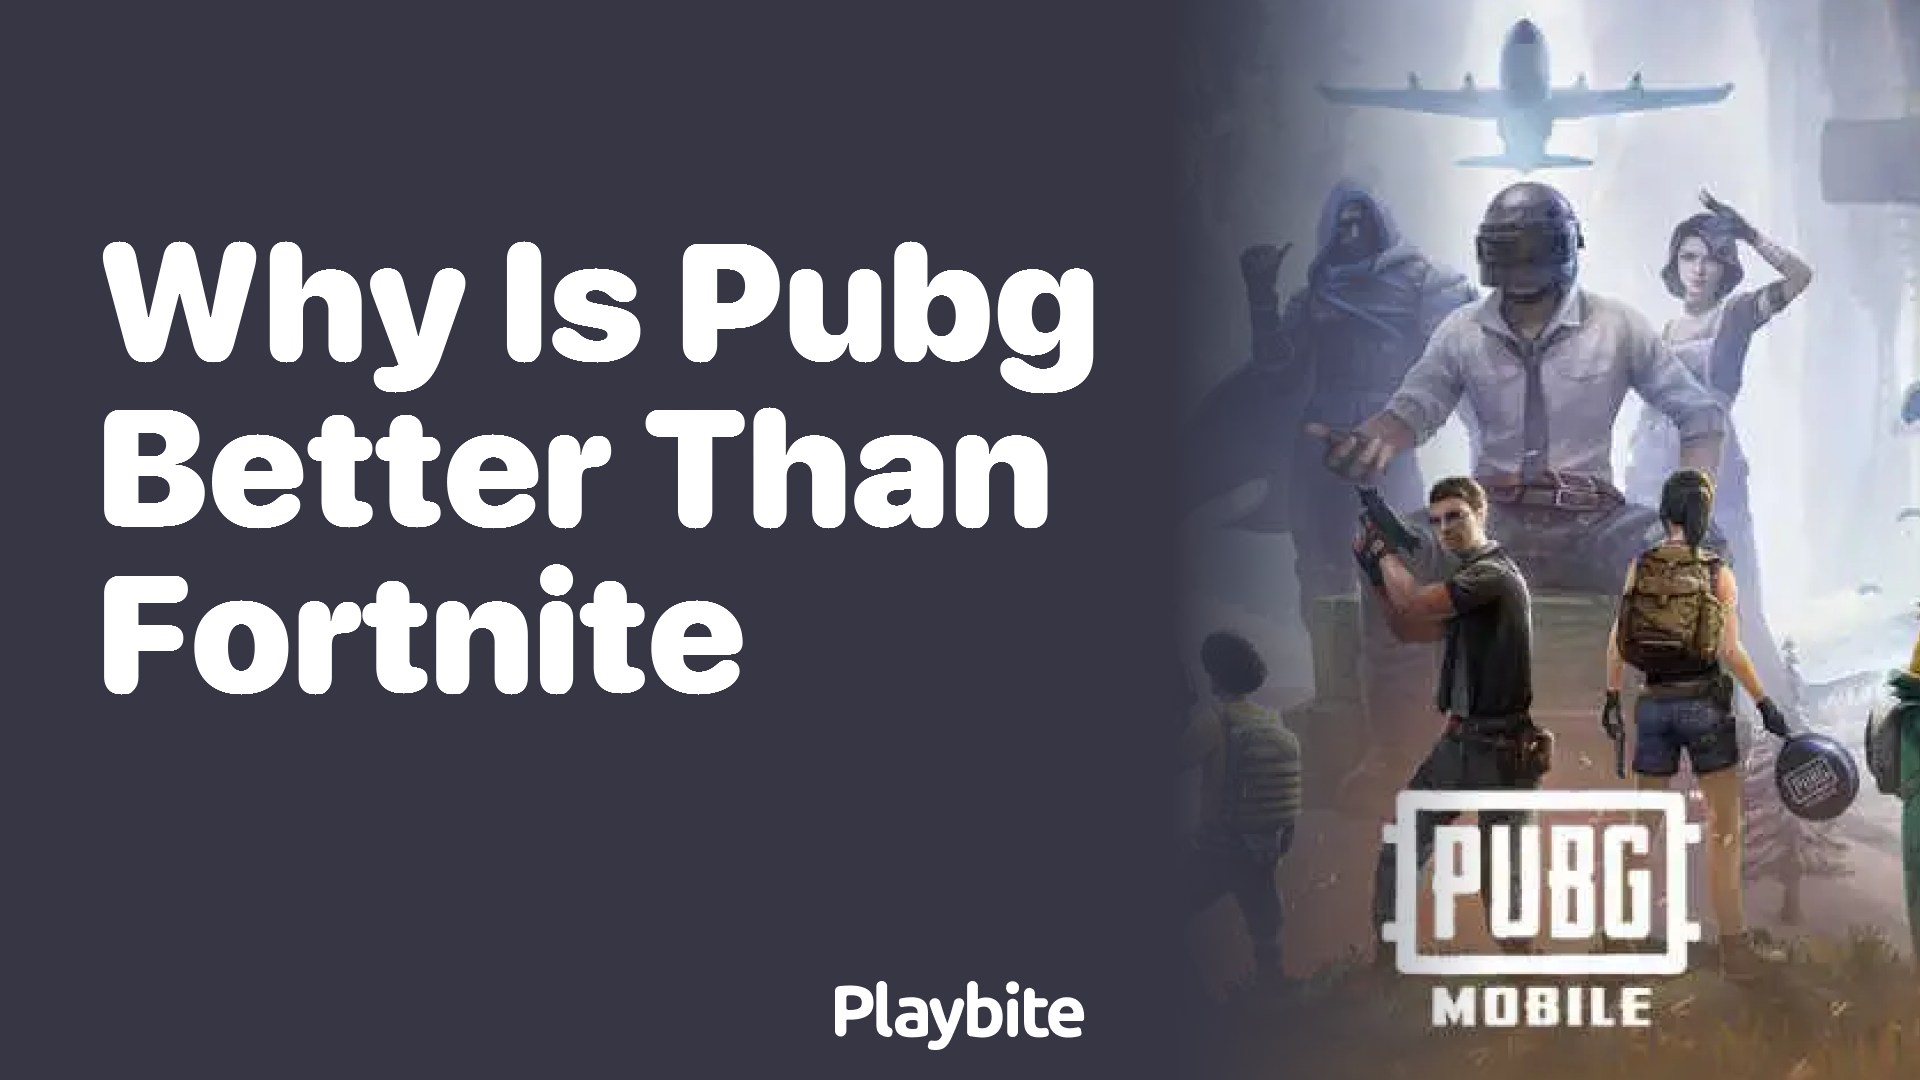 Why is PUBG Better Than Fortnite? A Fun Look at Mobile Gaming Rivalry